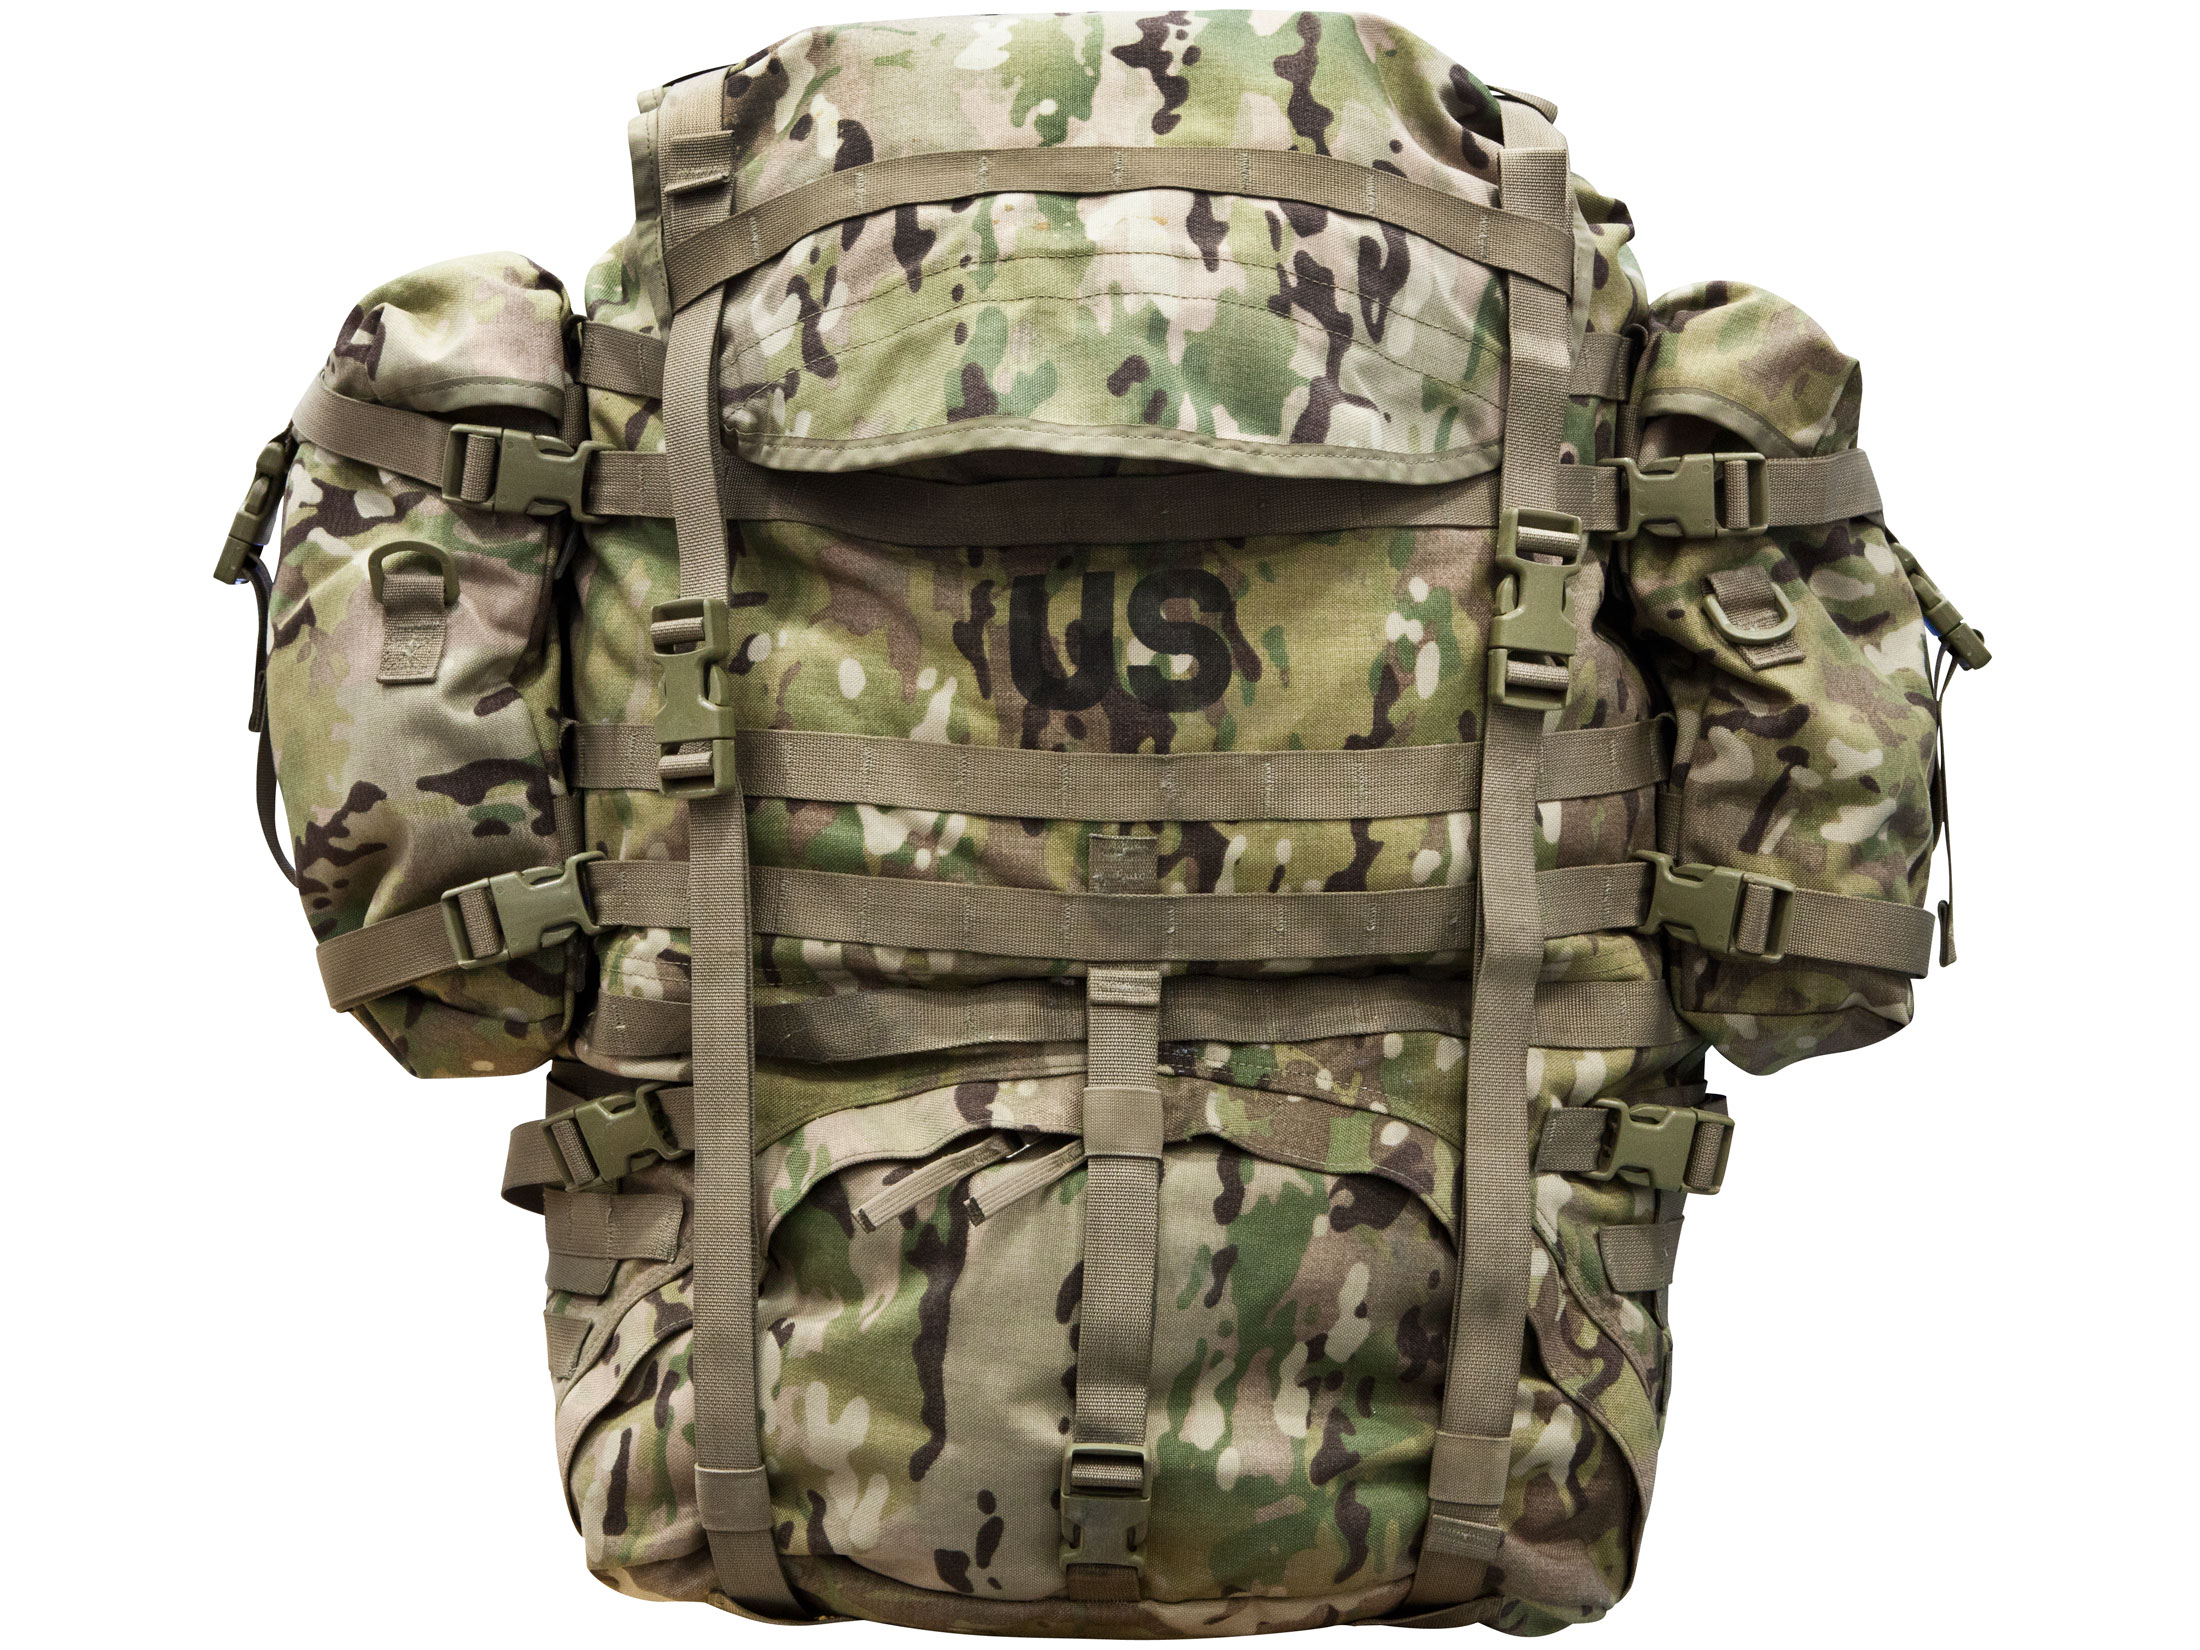 Digital Camo Molle II Large Backpack COMPLETE! The One You Want ! ! 